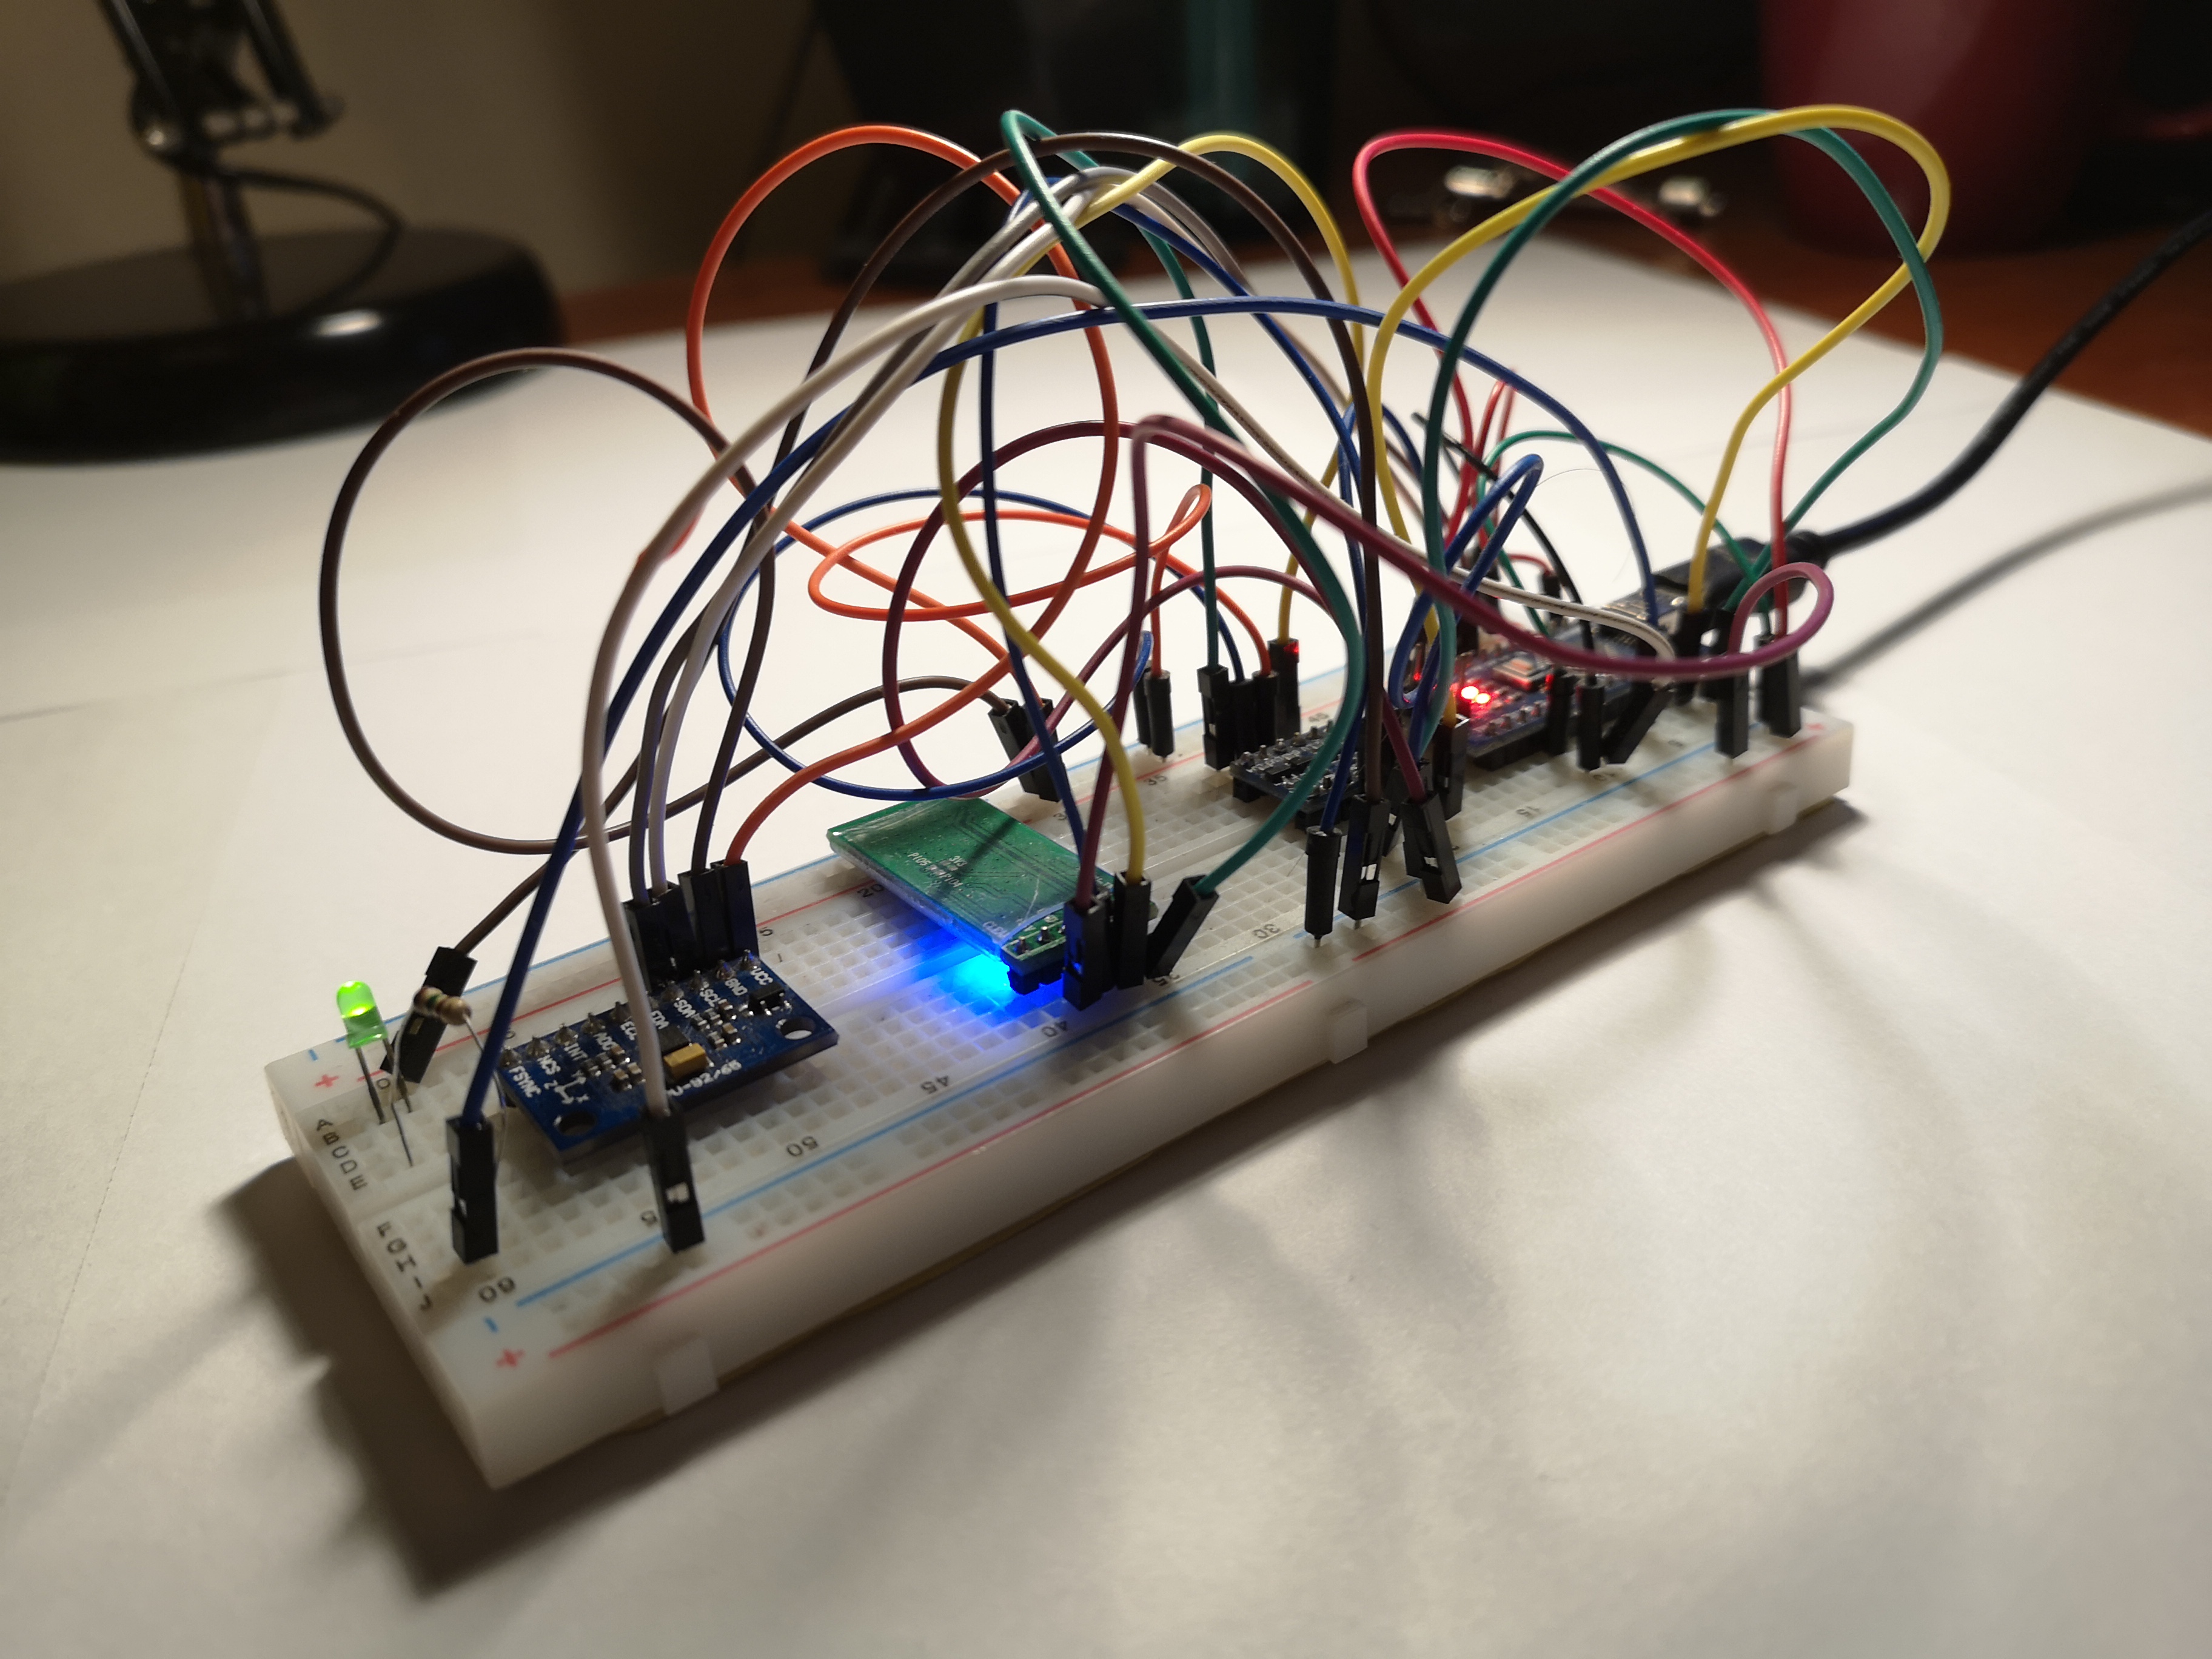 Components on breadboard